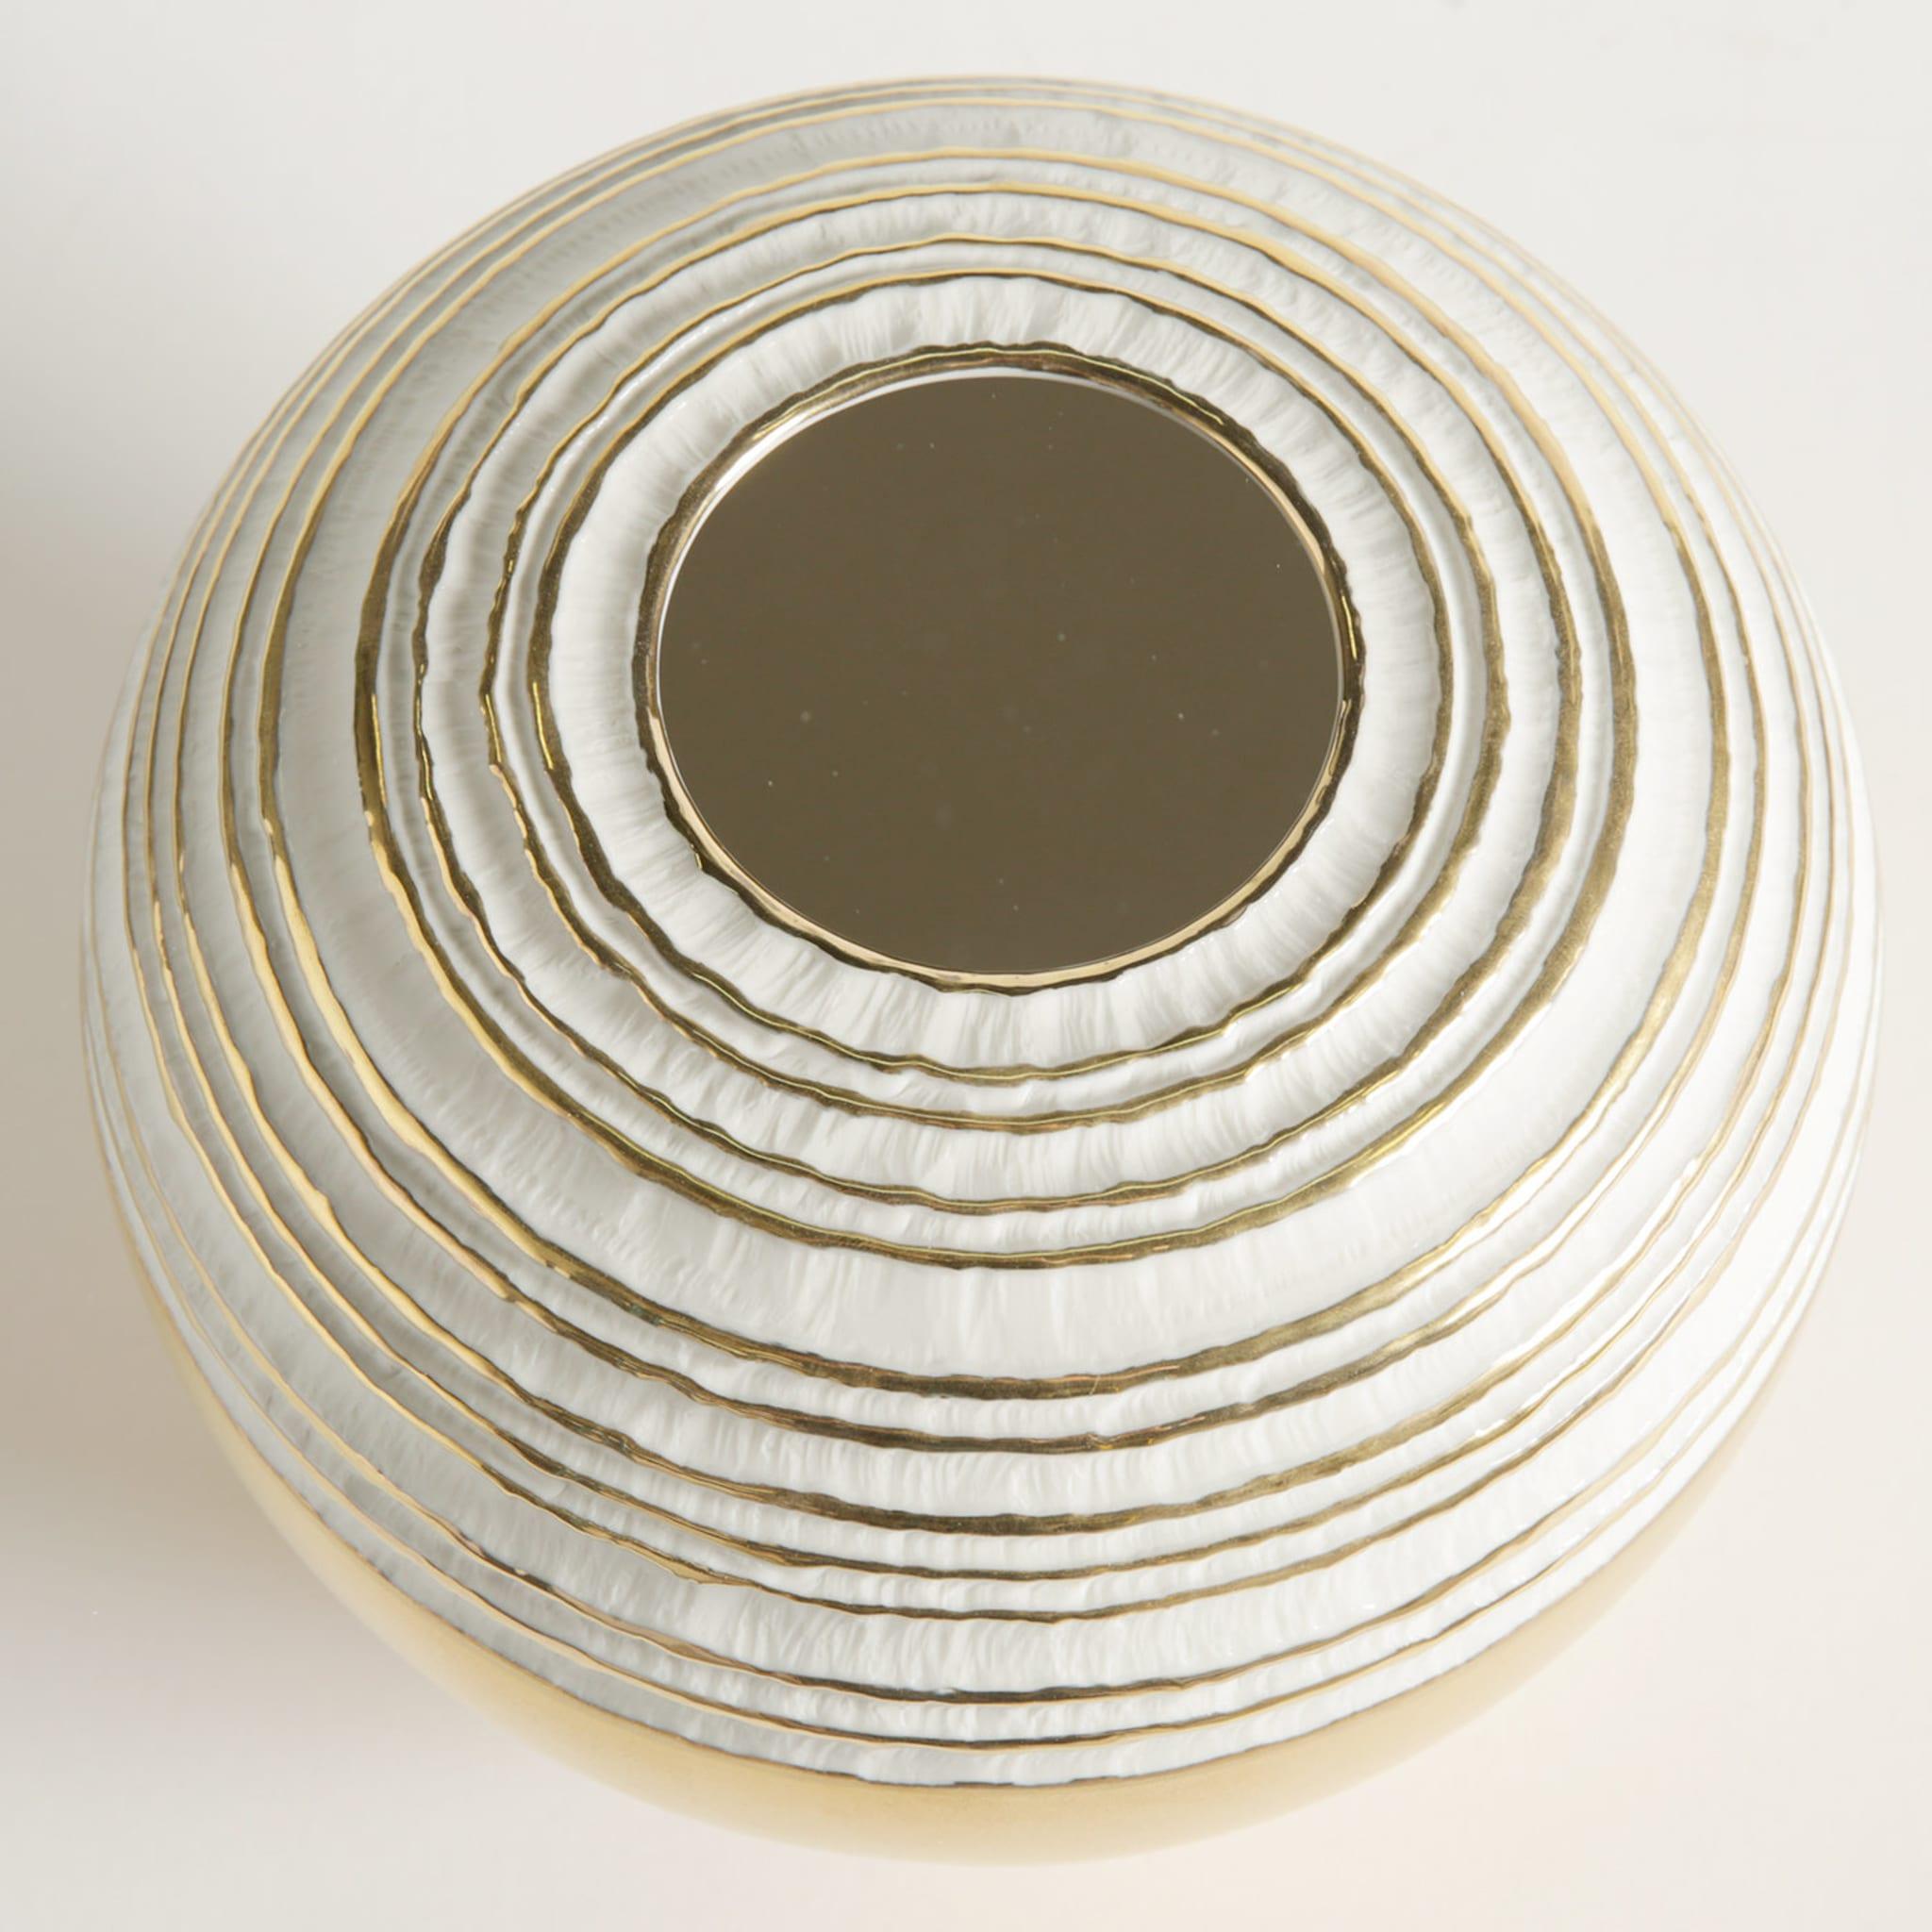 In this exquisite porcelain vase, a classic design is enriched by the presence of a precious external layer of hand-applied 23k gold that brightens the bottom of the piece and runs horizontally in concentric rings around the top, making this vase a